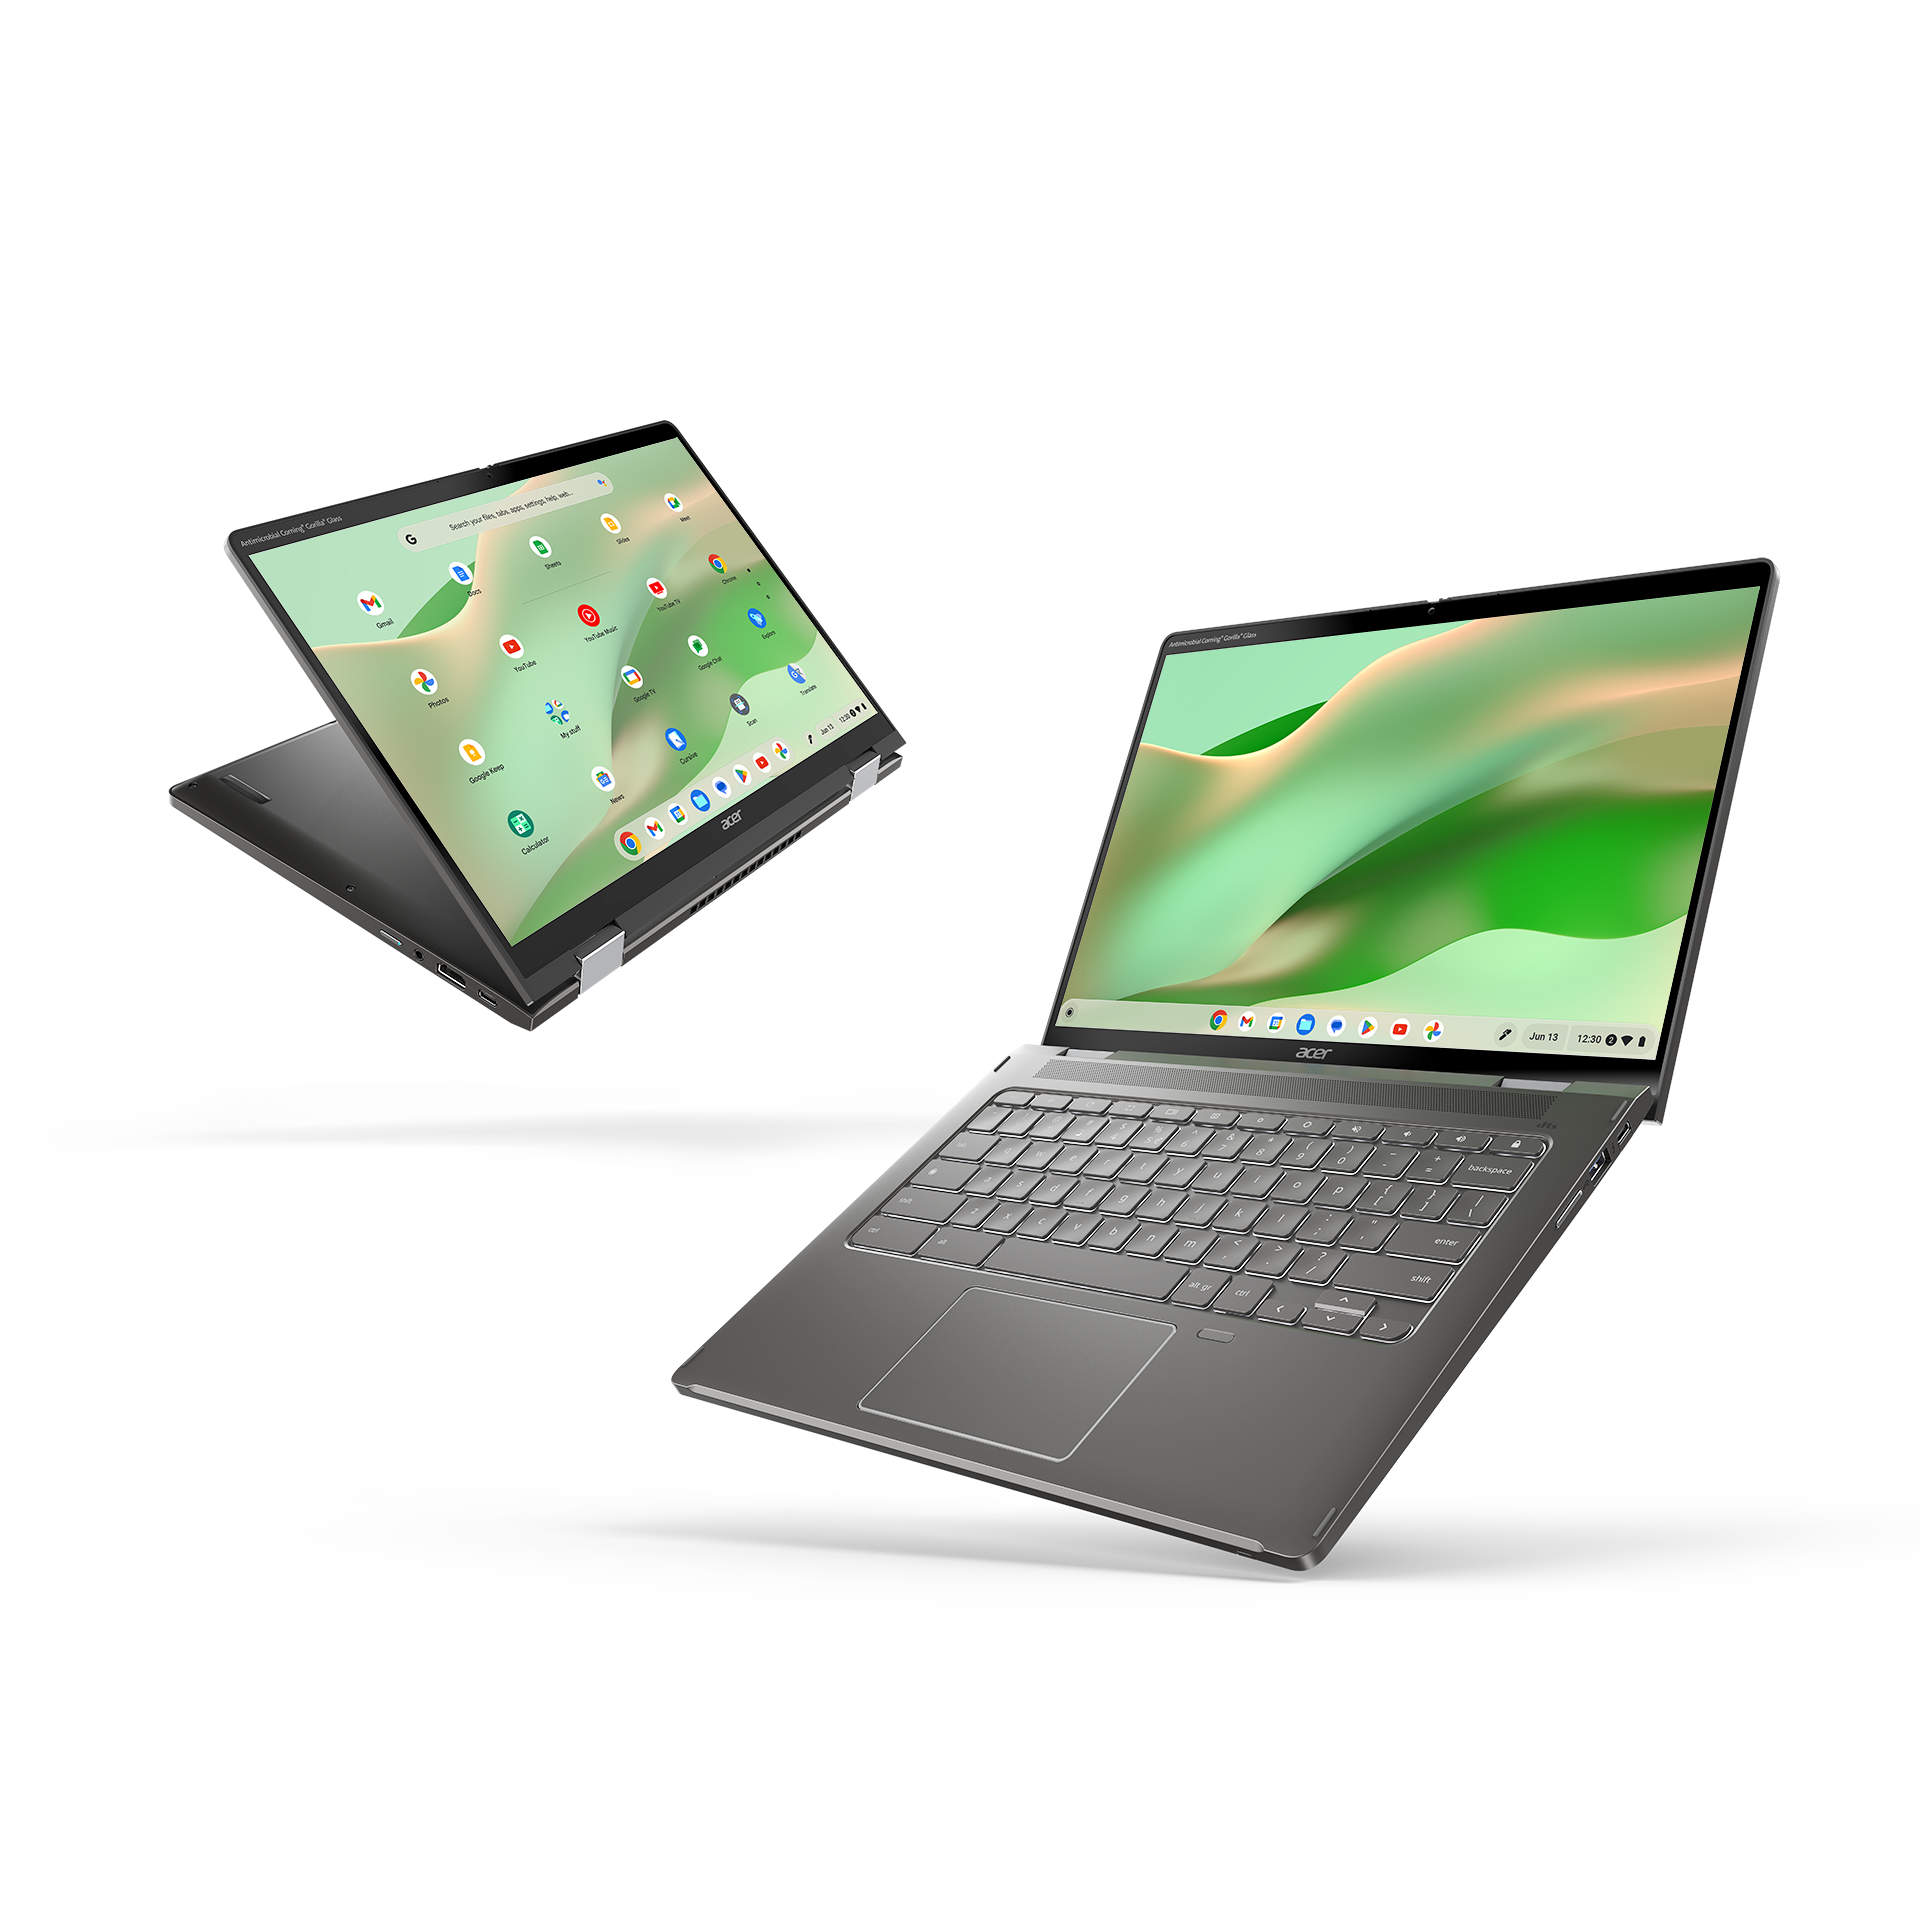 Acer Introduces Chromebook Spin 714, In Both Standard And Enterprise Editions